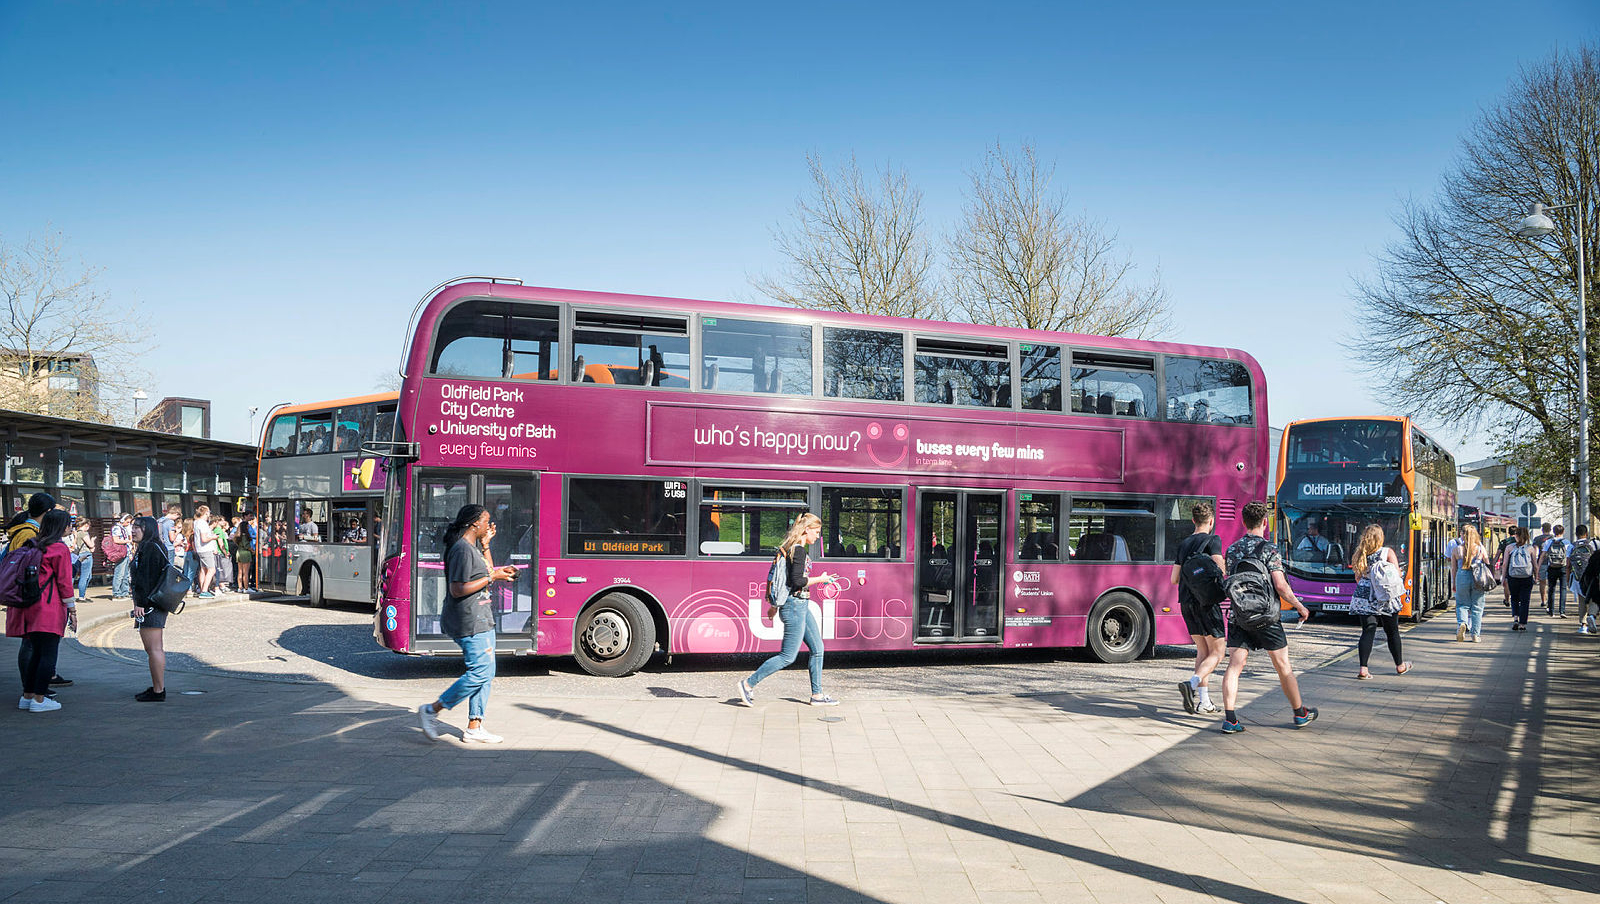 Image of the University of Bath Bus Stop